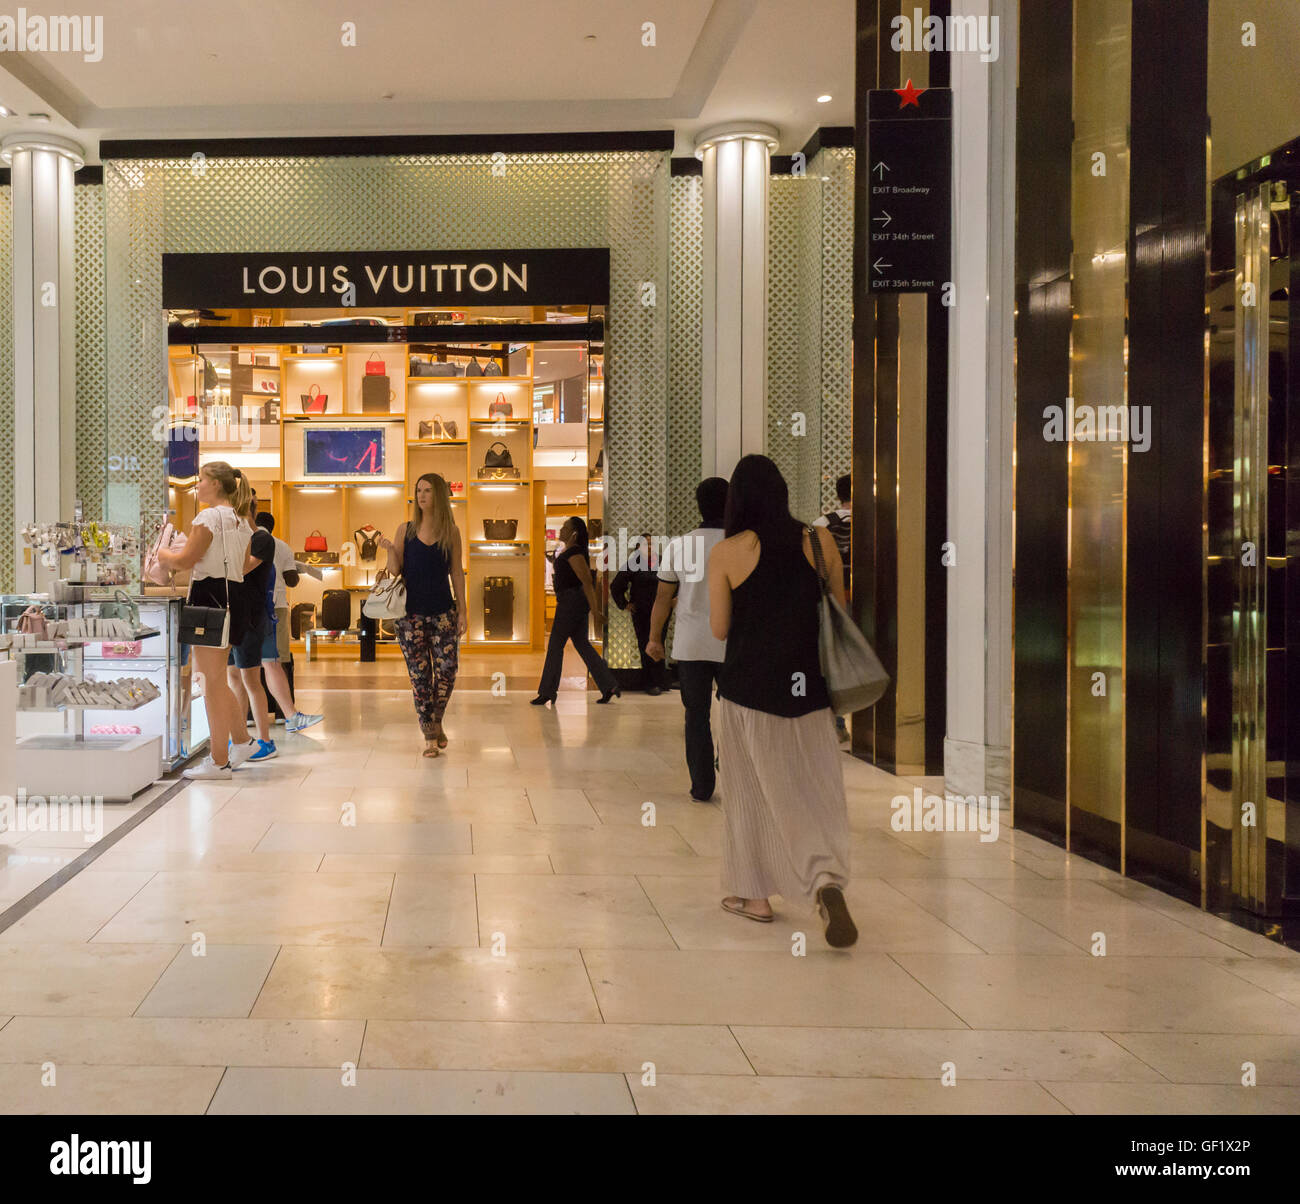 Albums 102+ Images louis vuitton new york macy’s herald sq. photos Updated